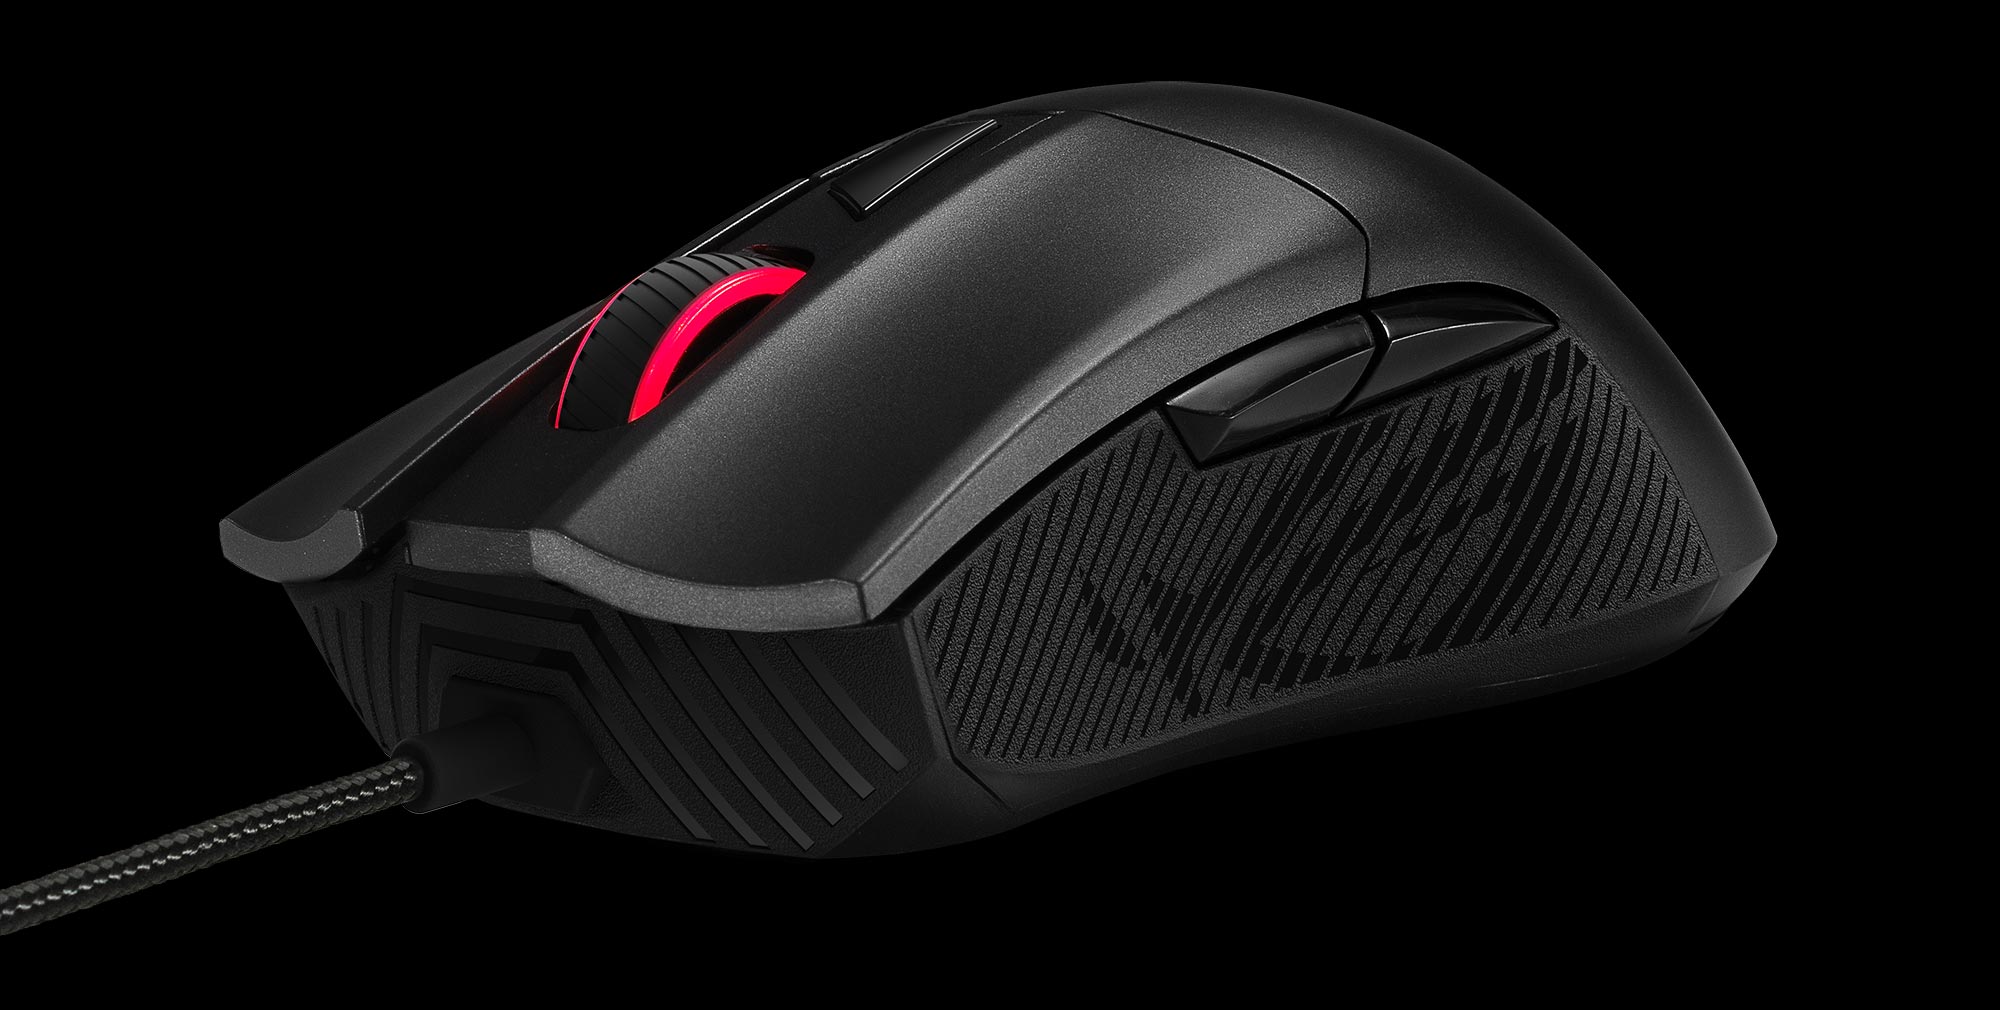 The ROG Gladius II Core mouse brings comfort and precision without breaking  the bank